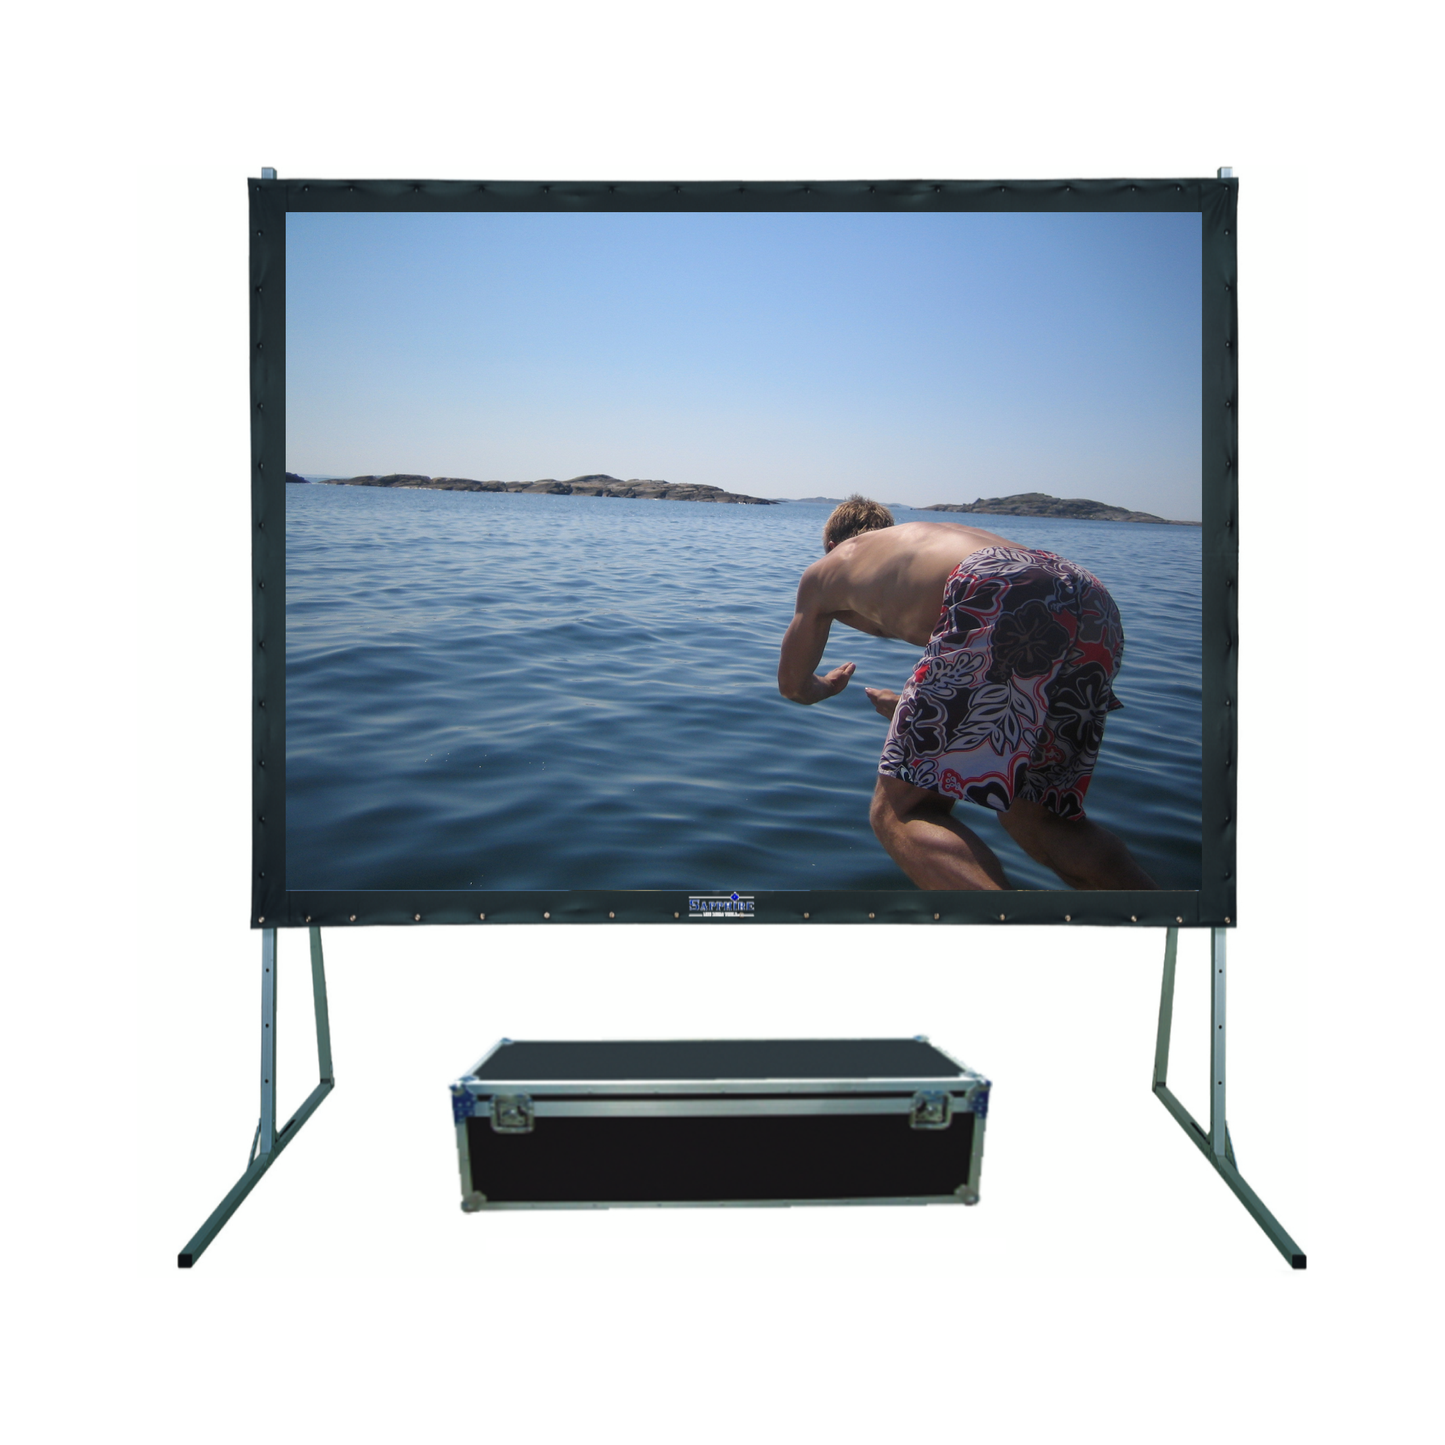 Sapphire Rapidfold Rear Projection  4:3 ratio. Viewing Area 2032mm x 1524mm